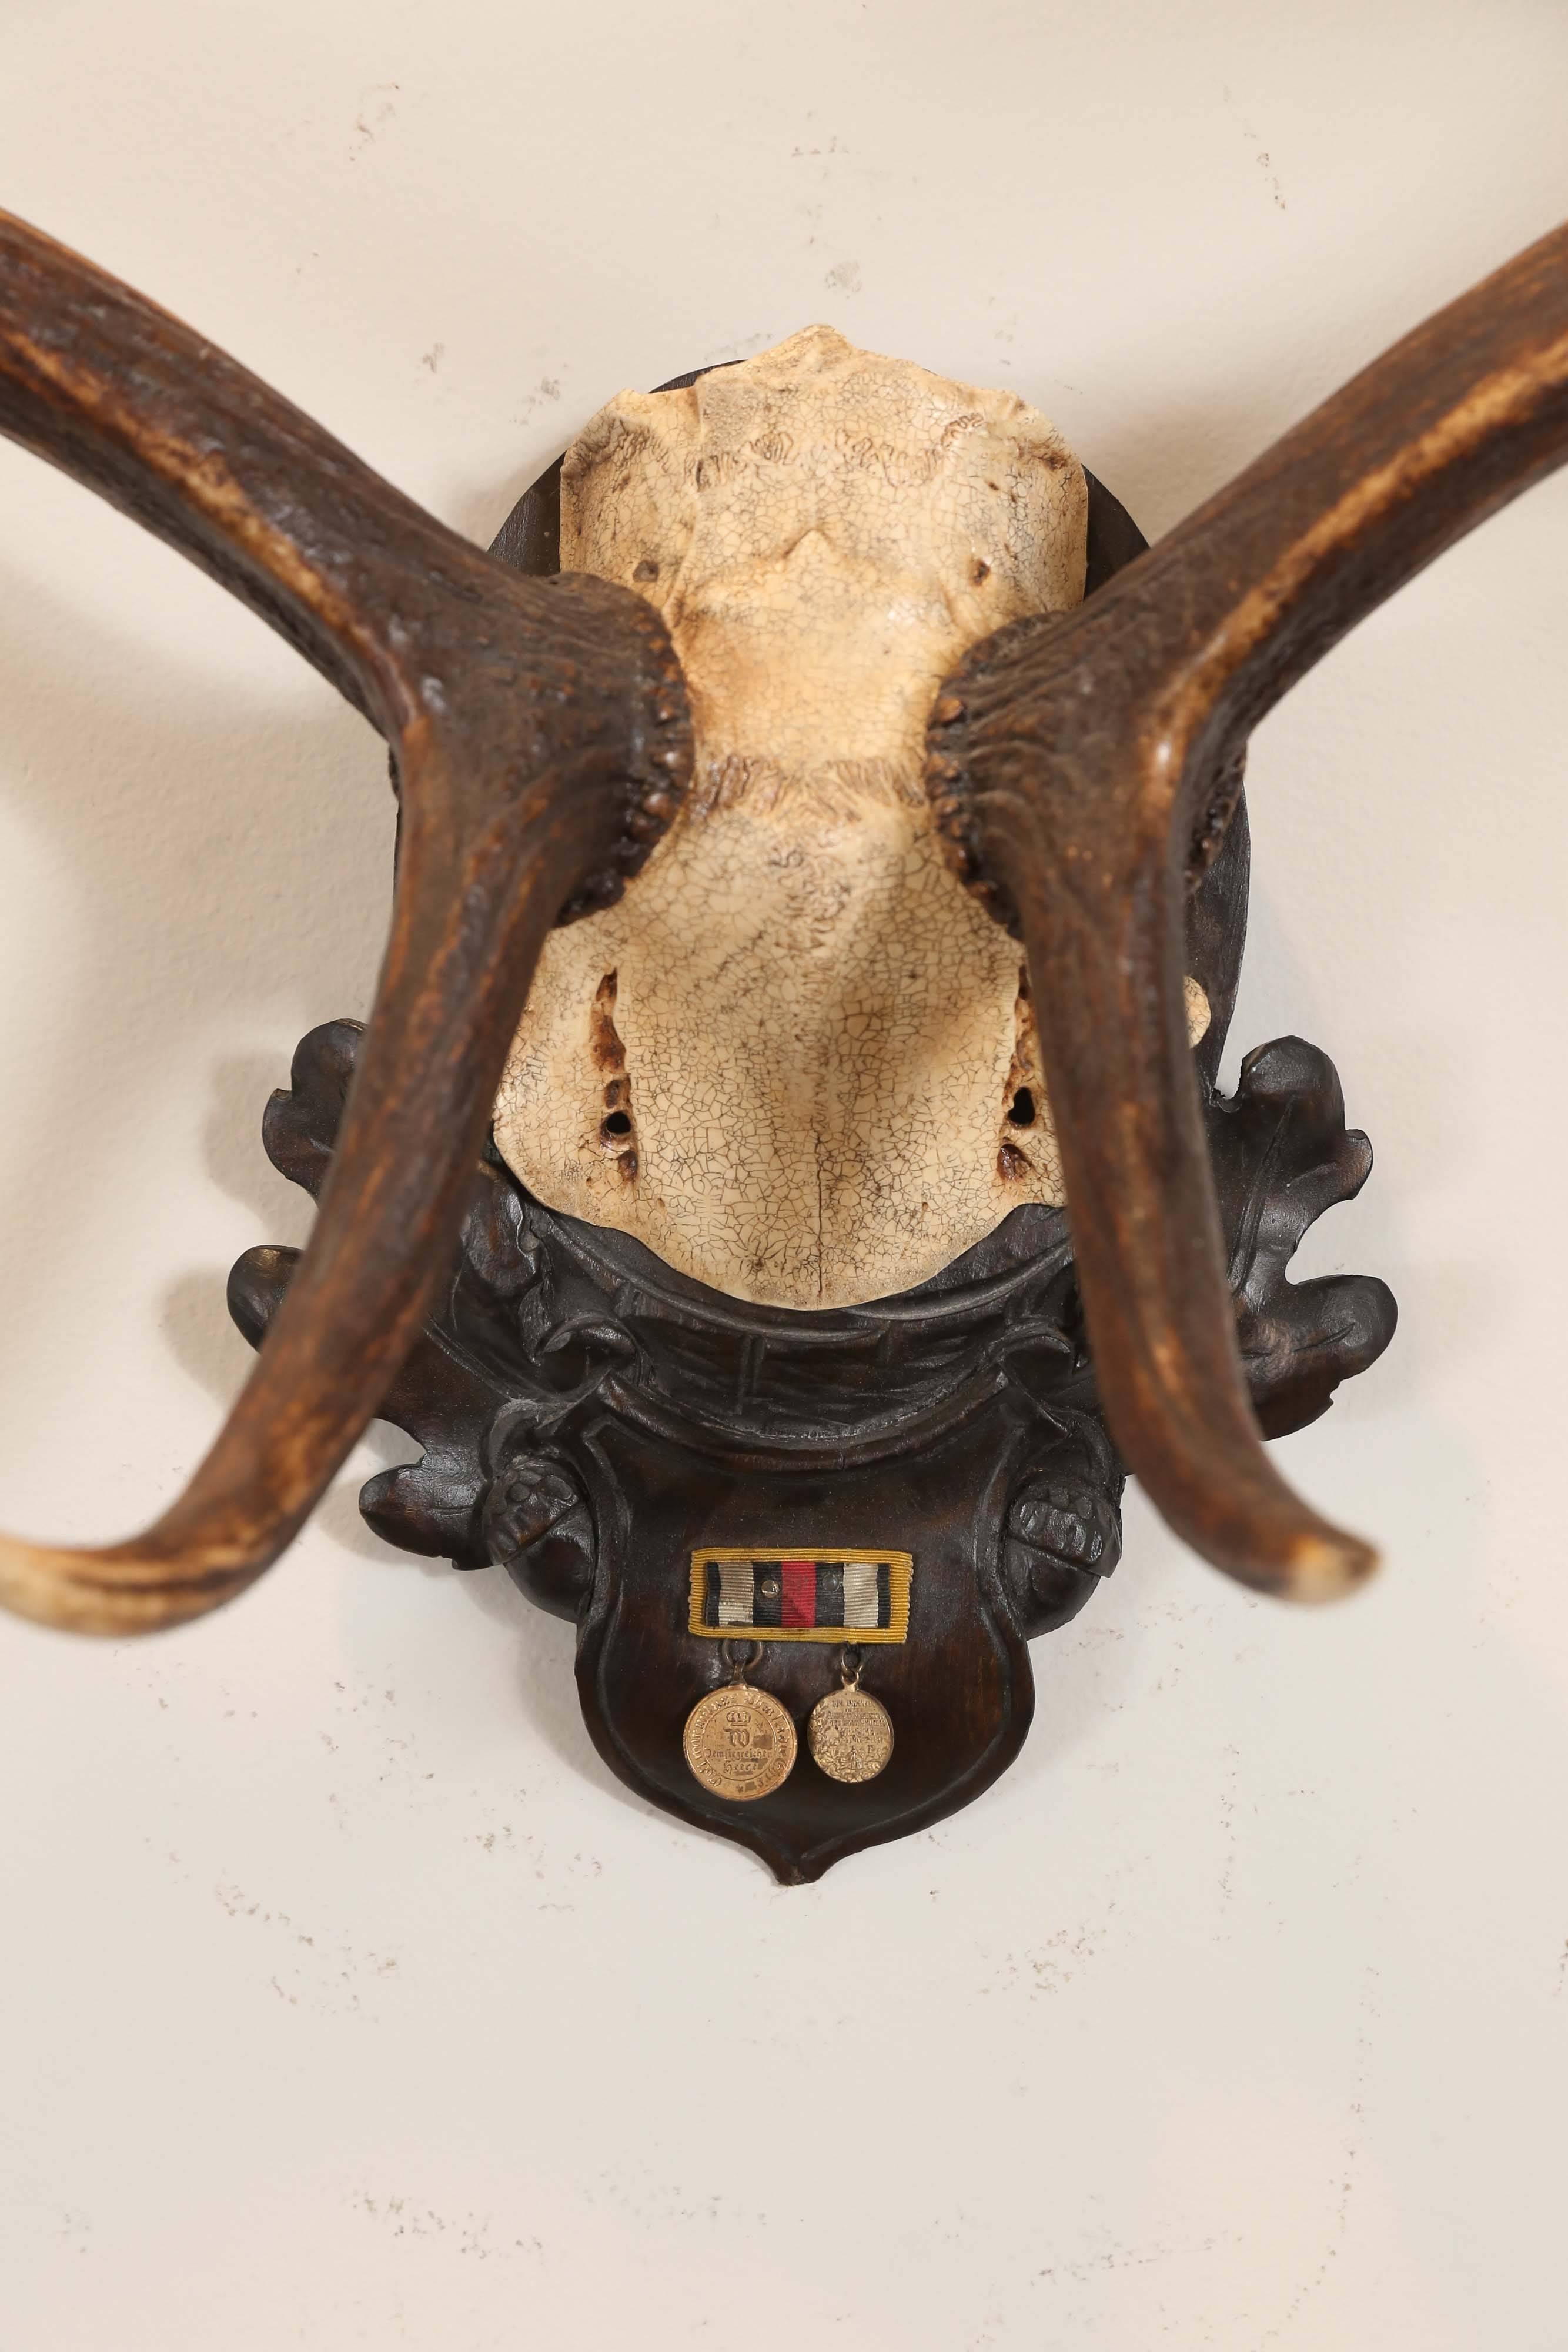 19th century Fallow Deer trophy from Emperor Franz Josef's castle at Eckartsau in the Southern Austrian Alps, a favorite hunting schloss of the Habsburg Royal family. This historic hunting trophy features the original Black Forest carved plaque and